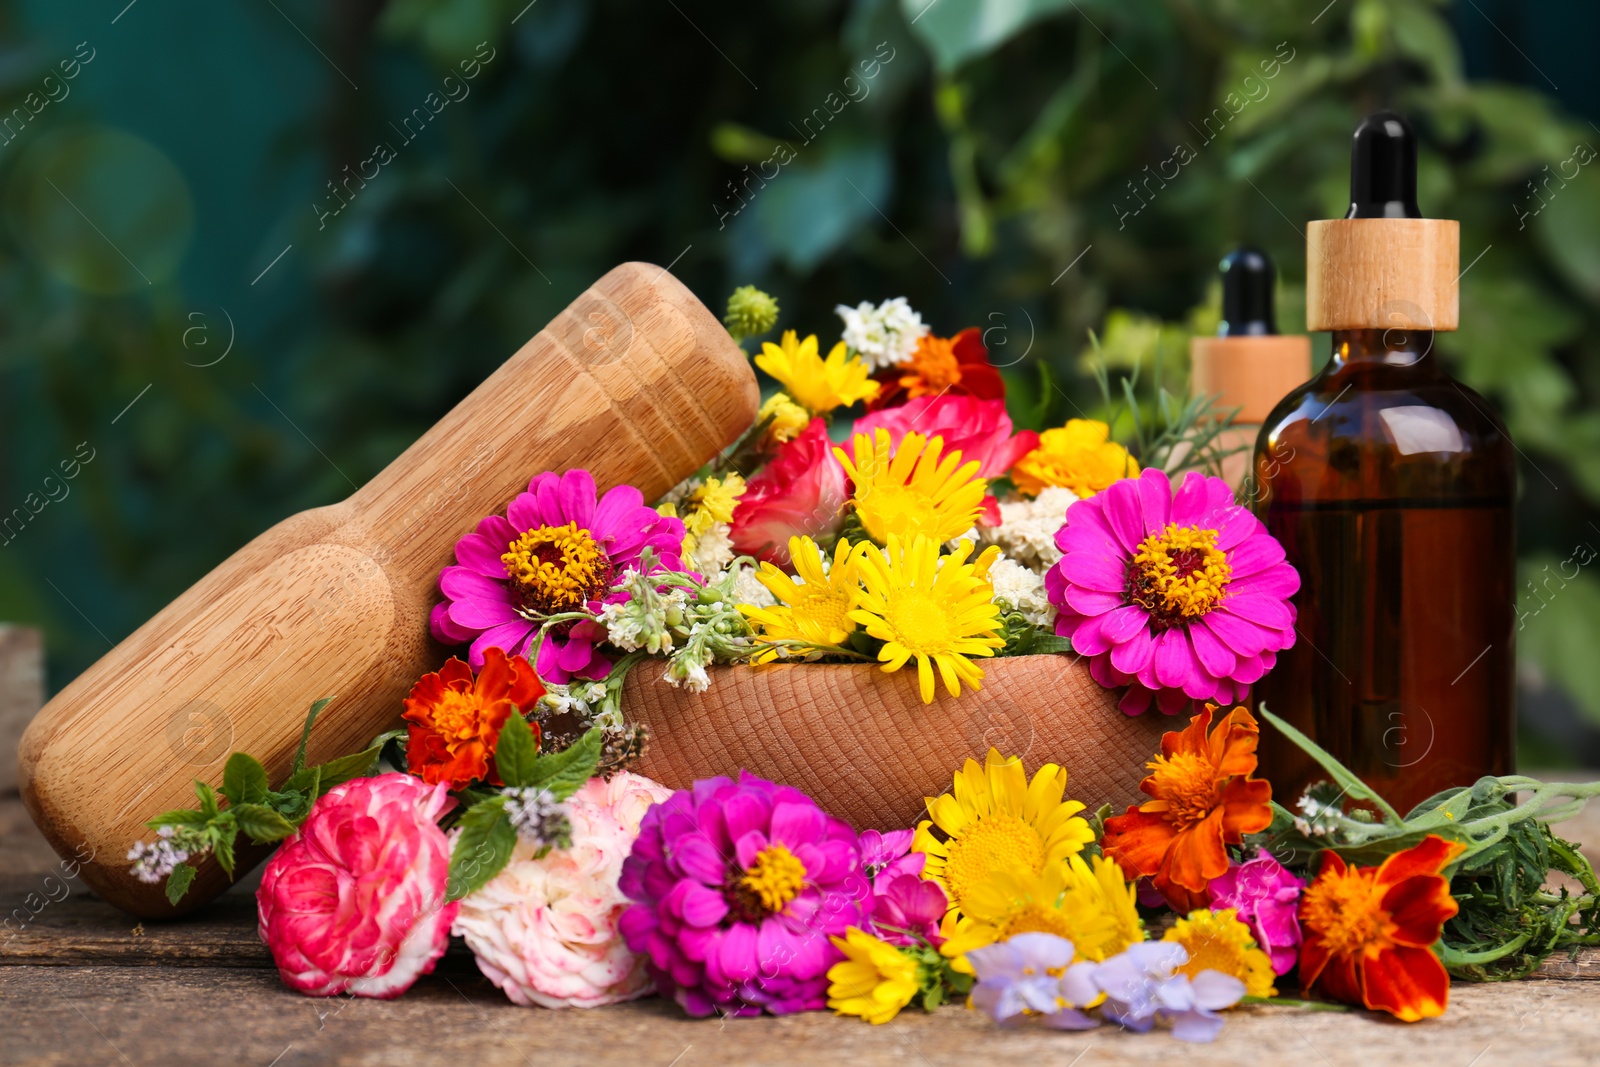 Photo of Bottles with essential oil, mortar, pestle and different flowers on wooden table outdoors